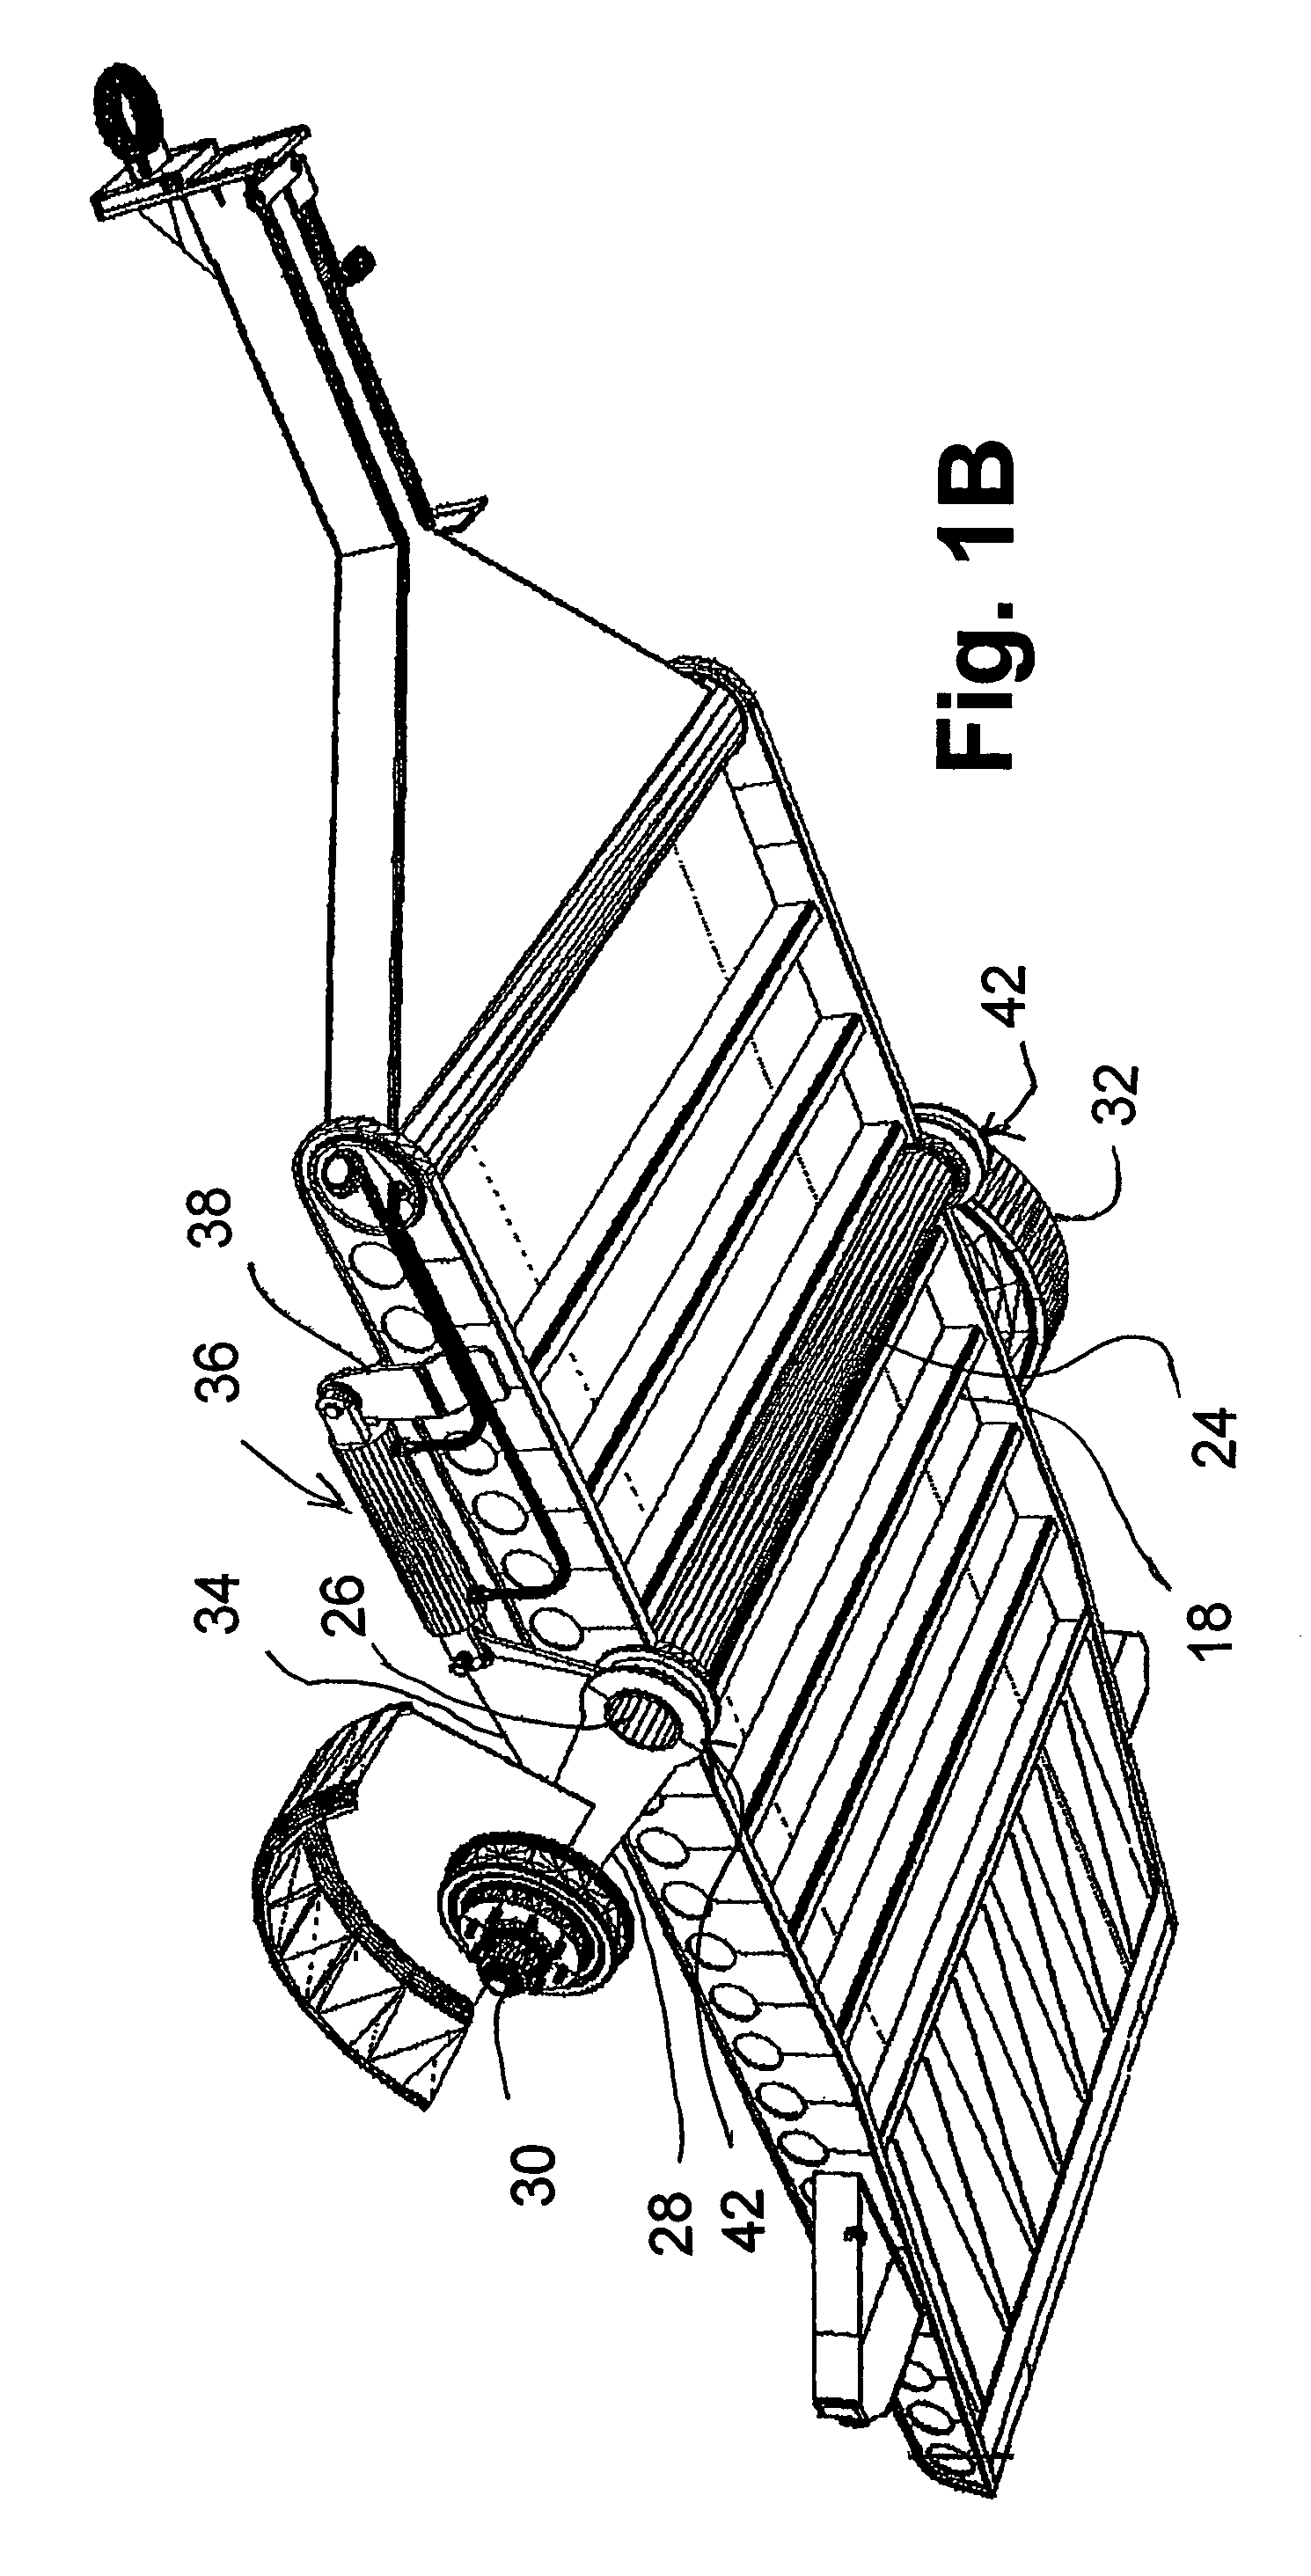 Method and apparatus for an adjustable trailer